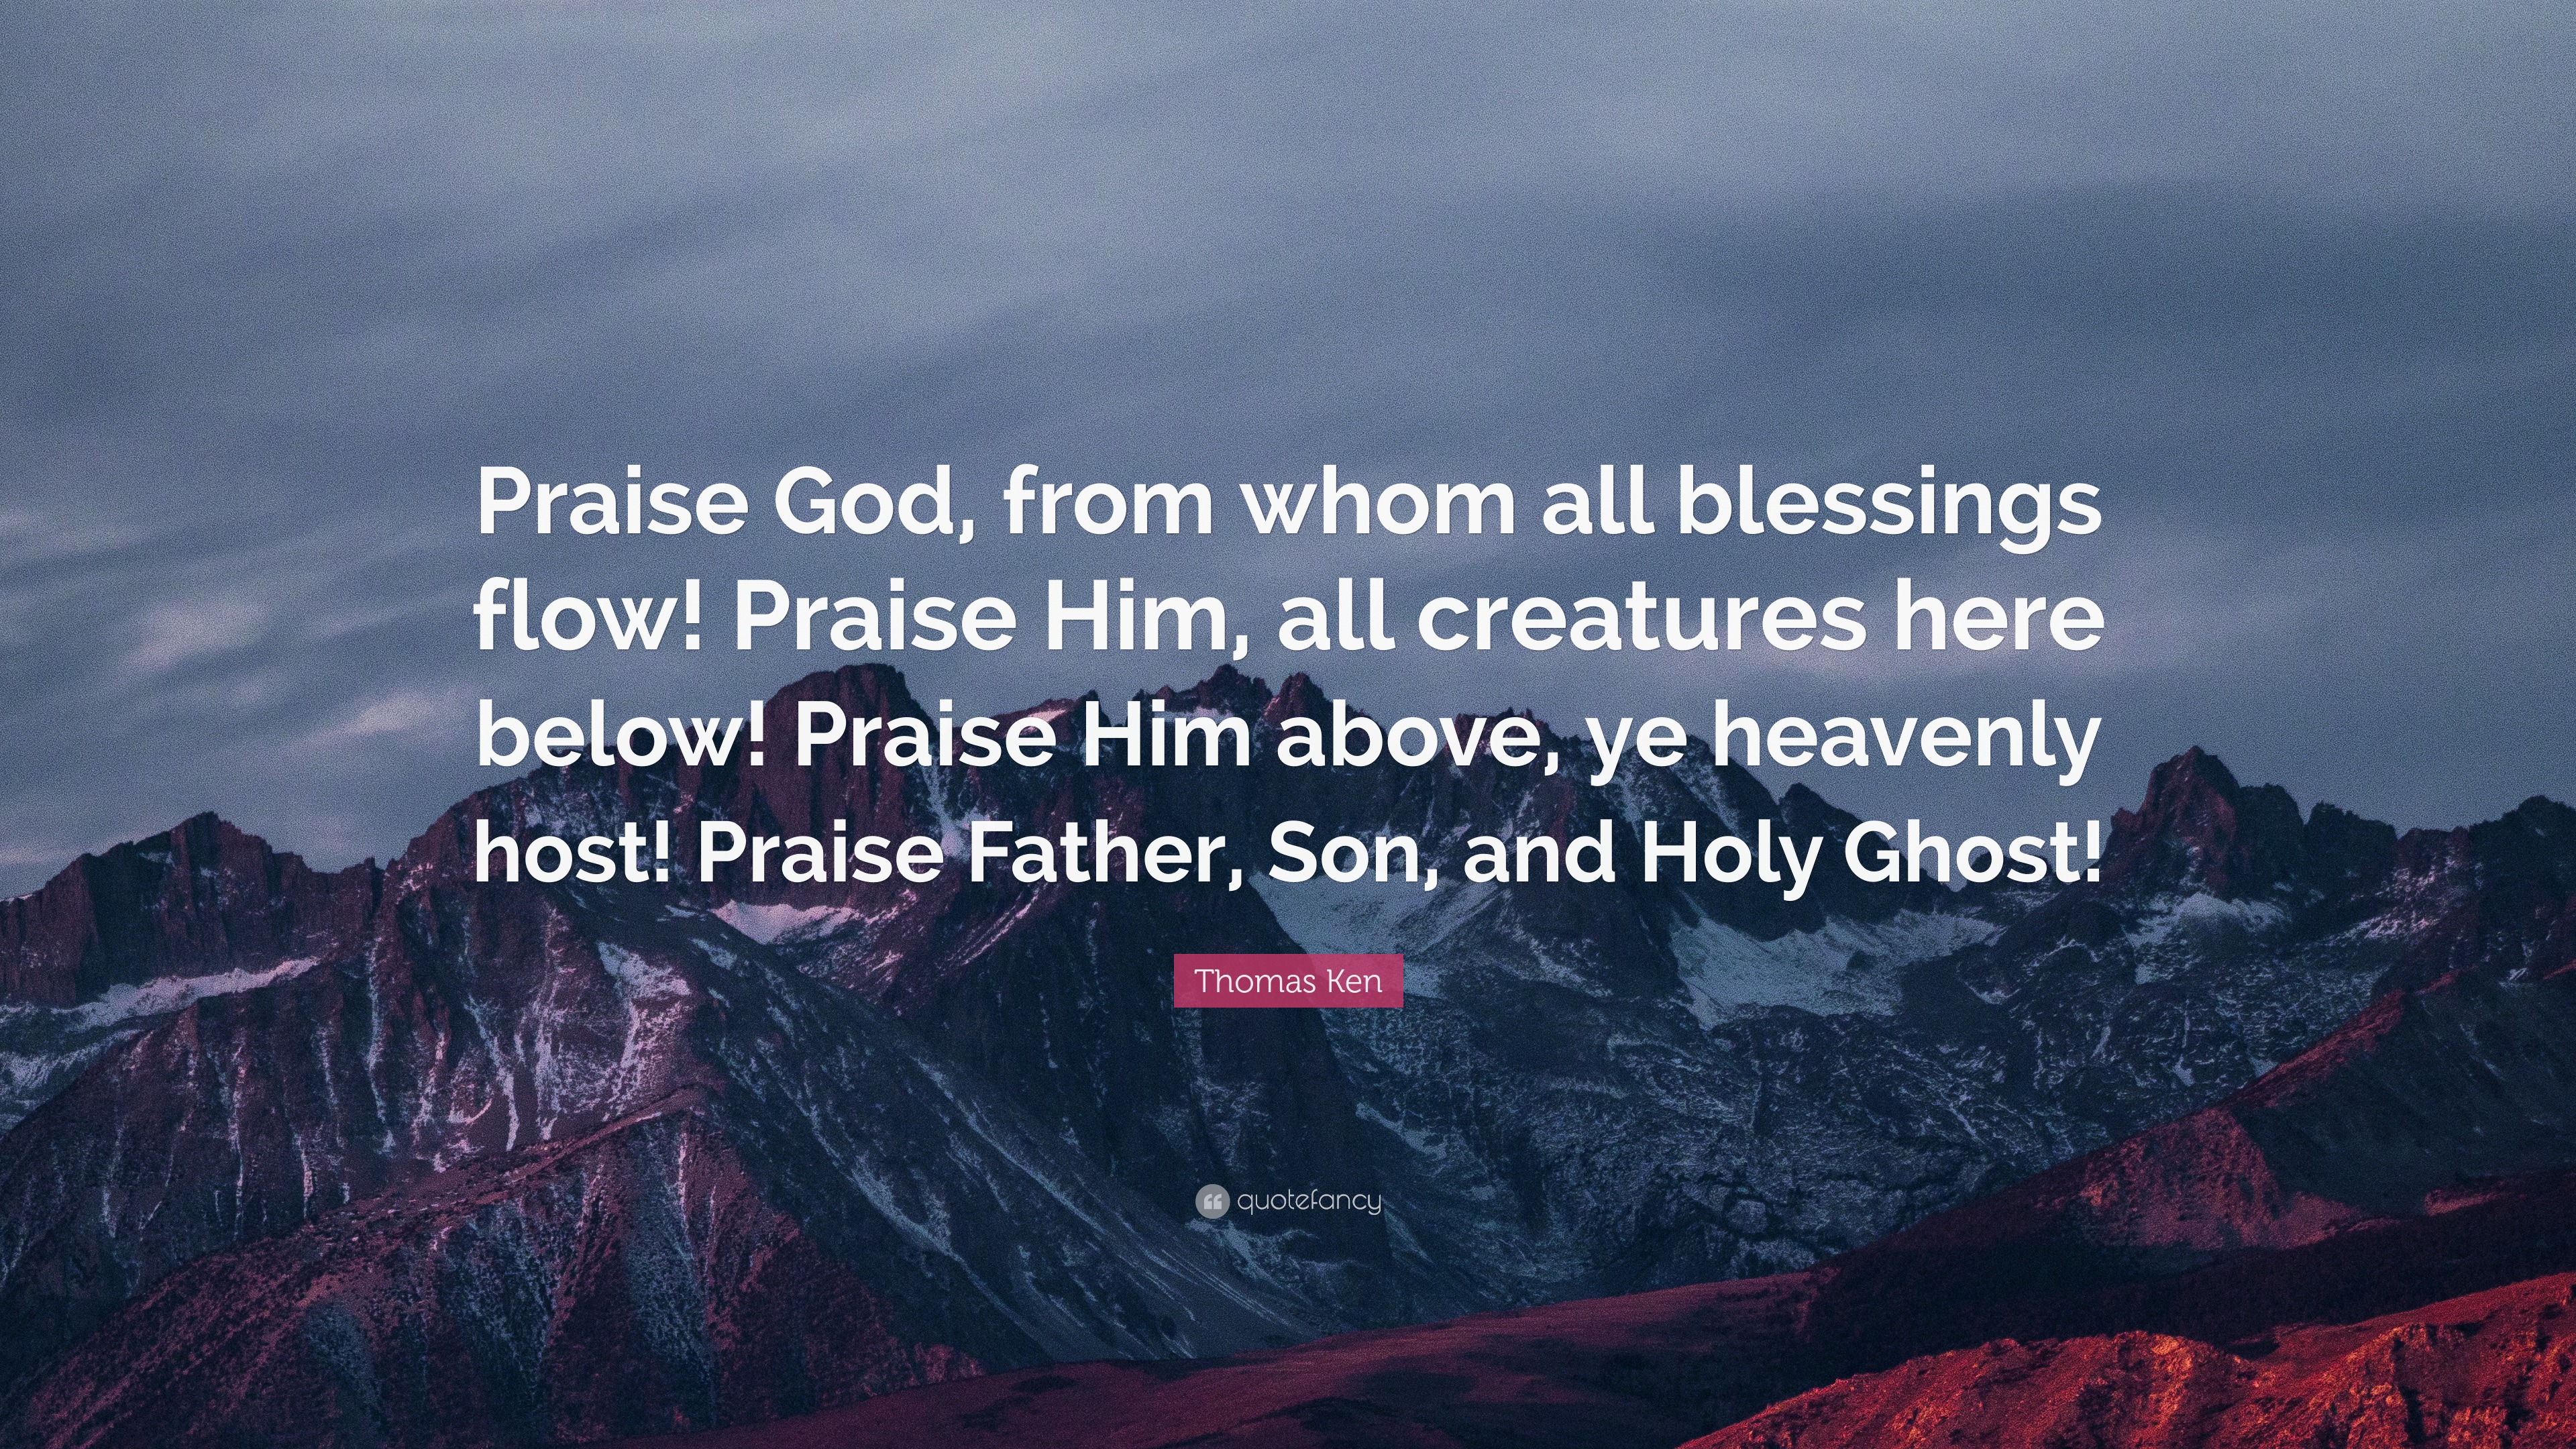 Thomas Ken Quote: "Praise God, from whom all blessings ...